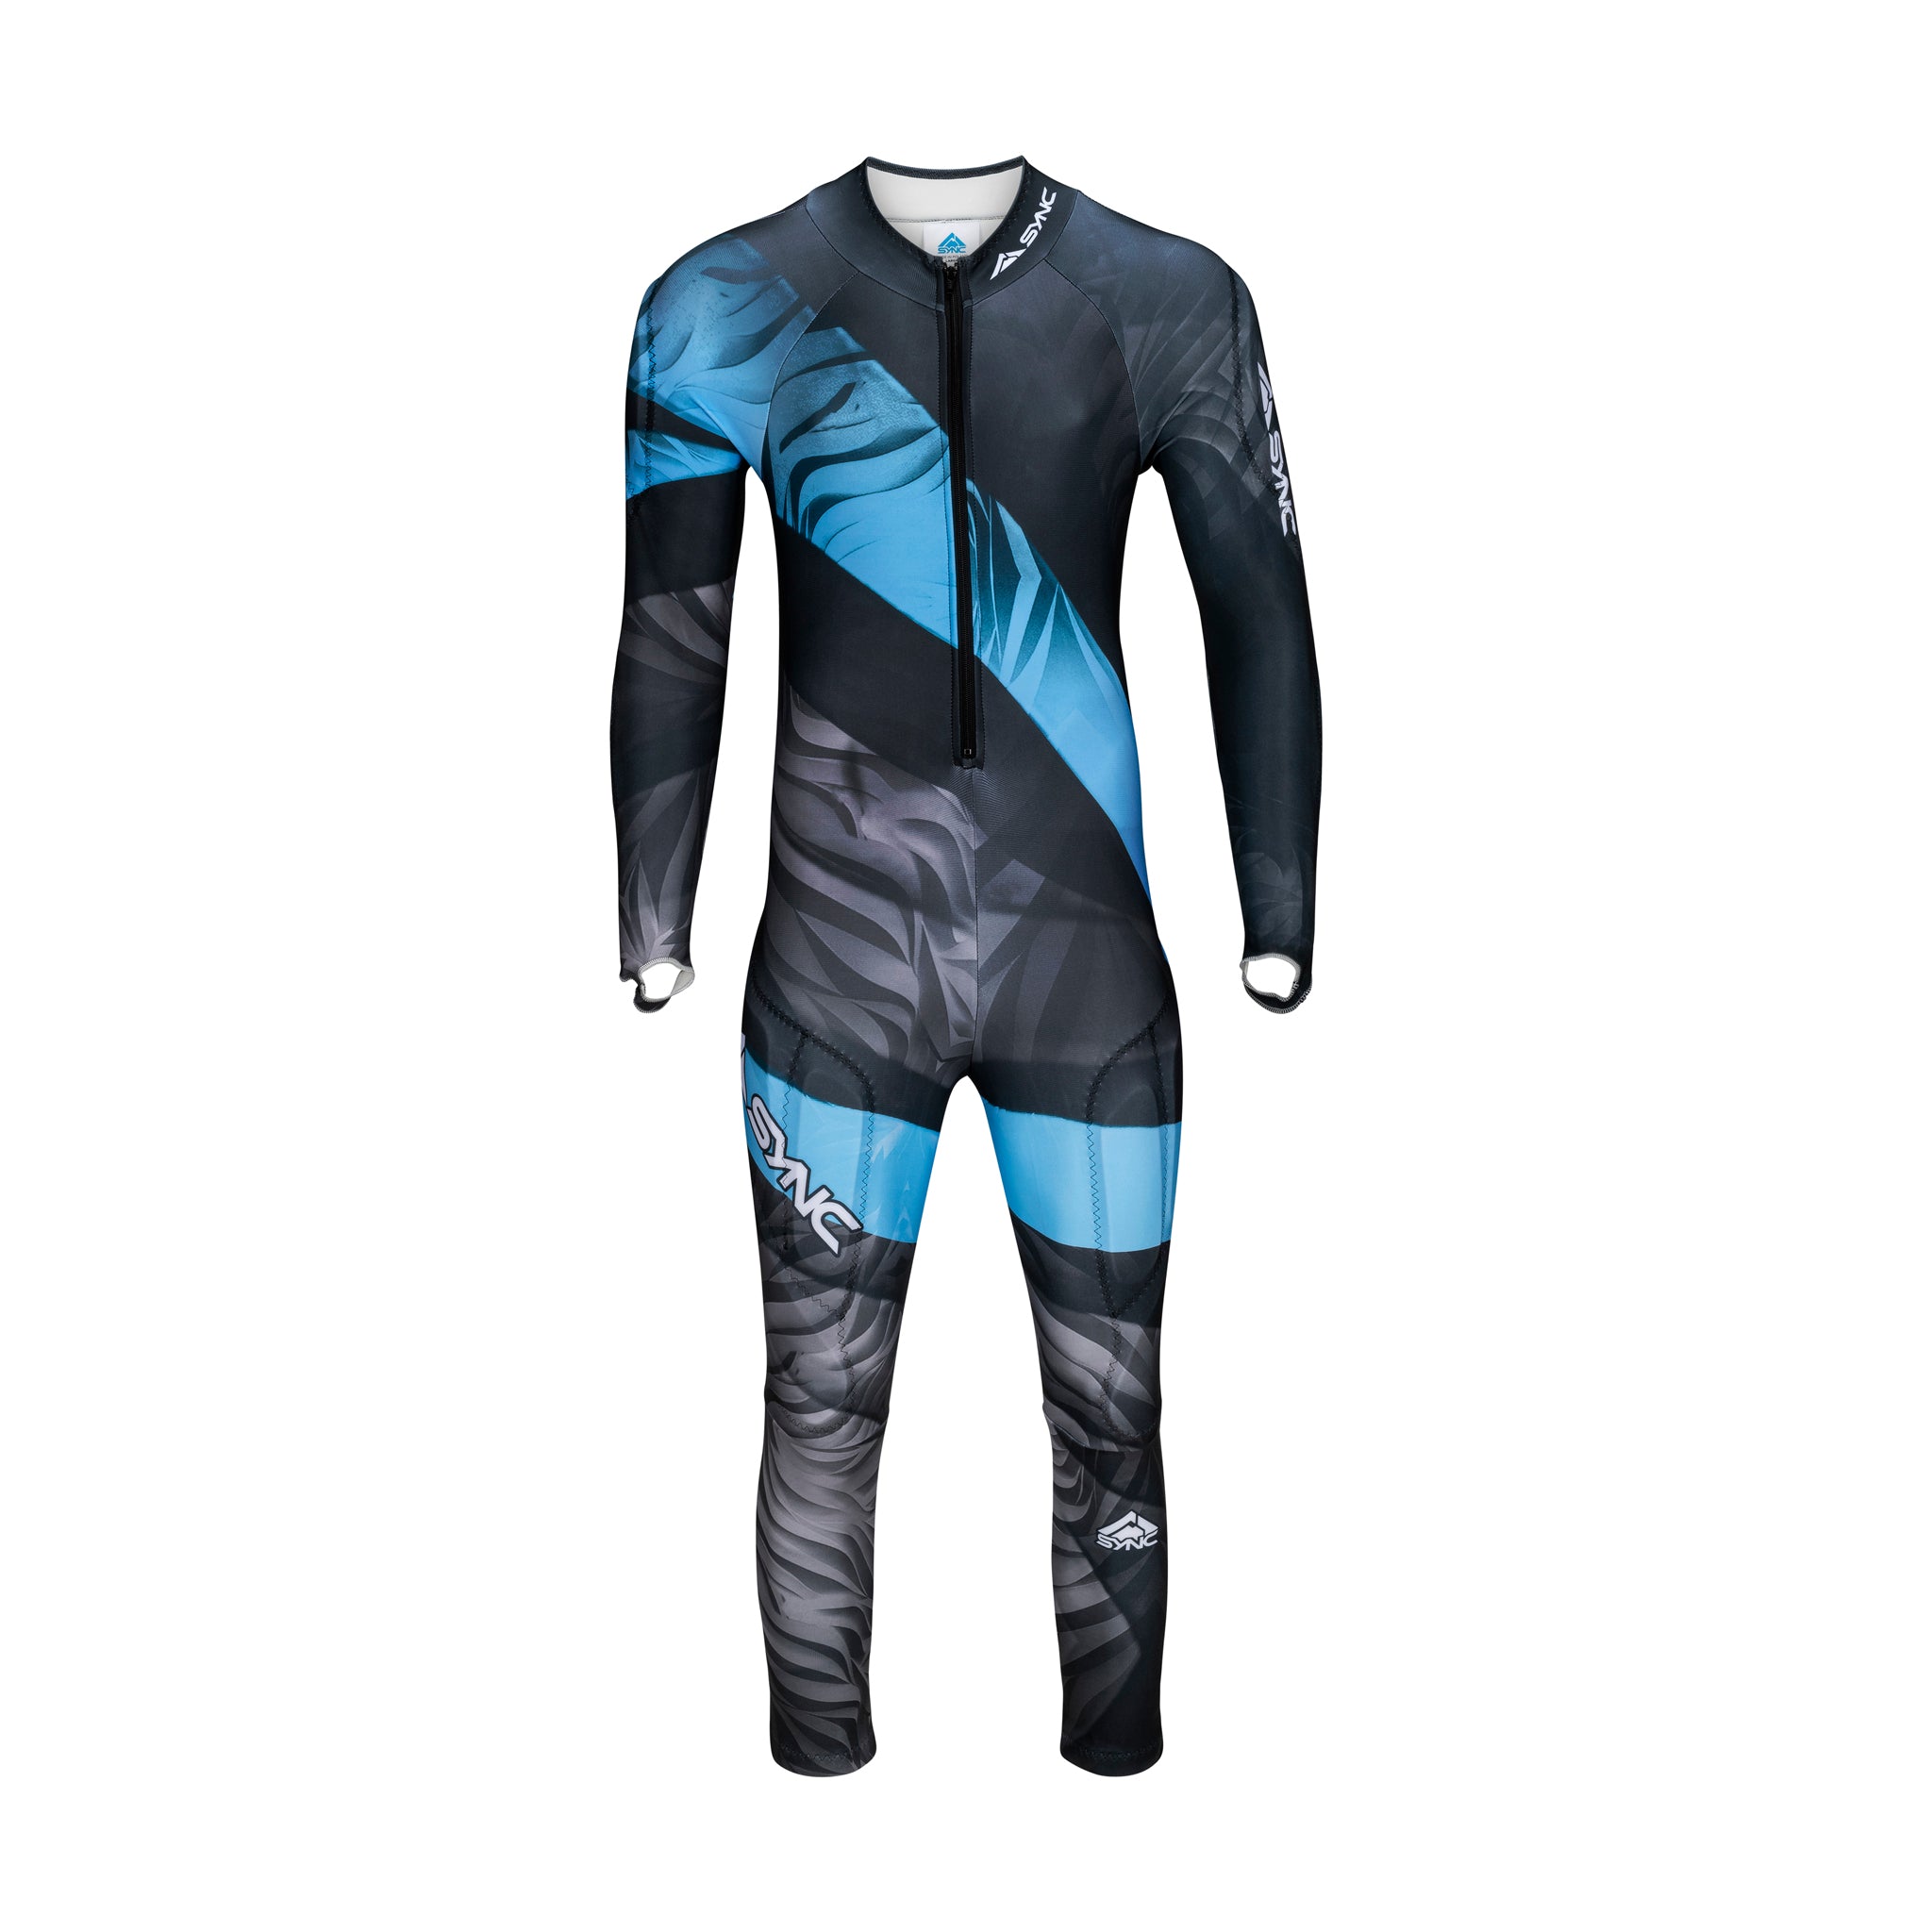 Boulder Nordic Club Custom Skiwear Available for a Limited Time - Boulder  Nordic Club